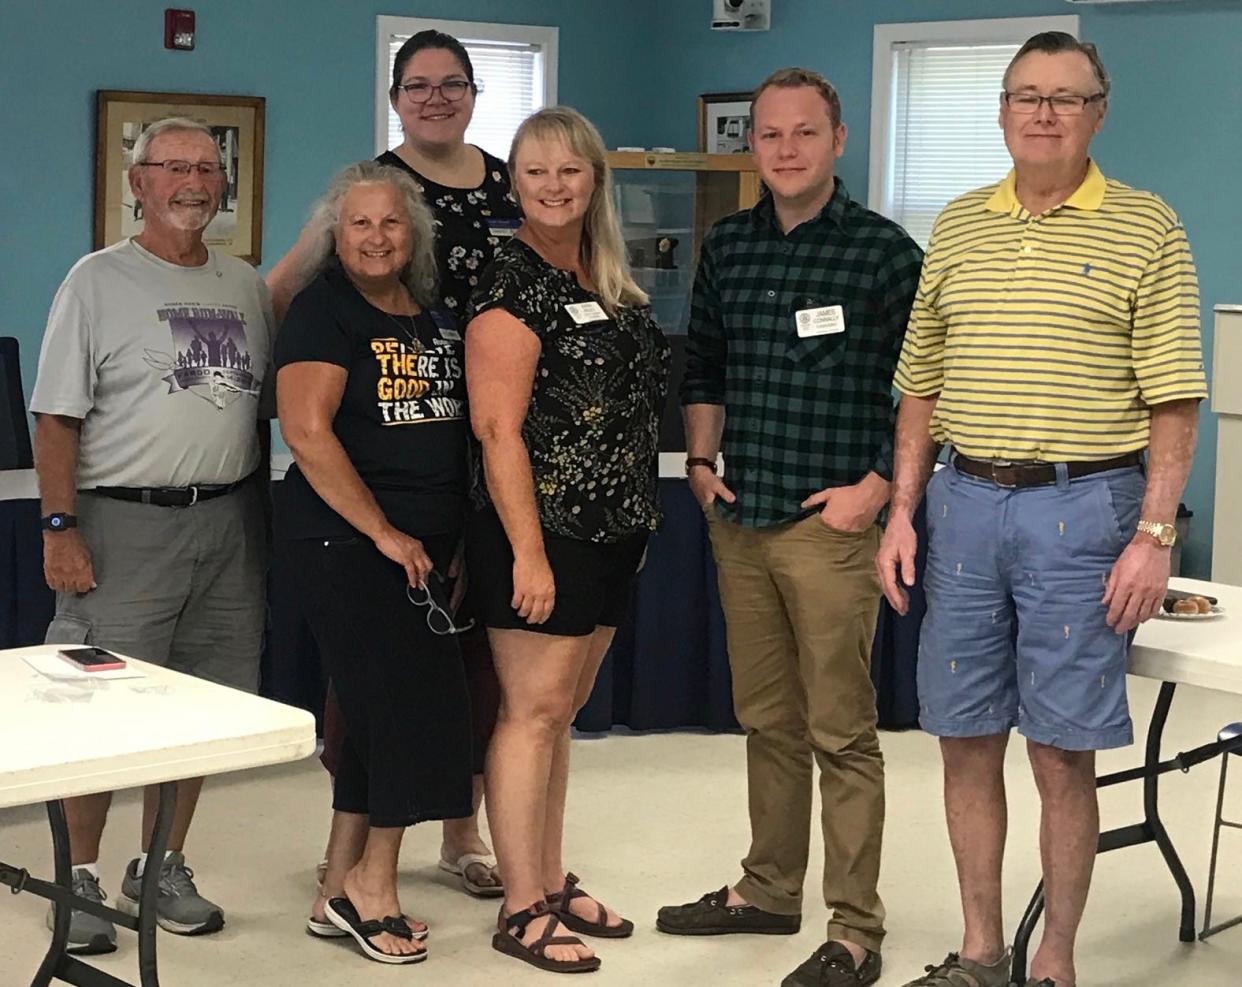 From left to right are Tom Riley, Peggy Belanger, Kate Howell, Erin Riley, James Connally and John Ware at a recent induction of new members by the Kennebunk Portside Rotary.